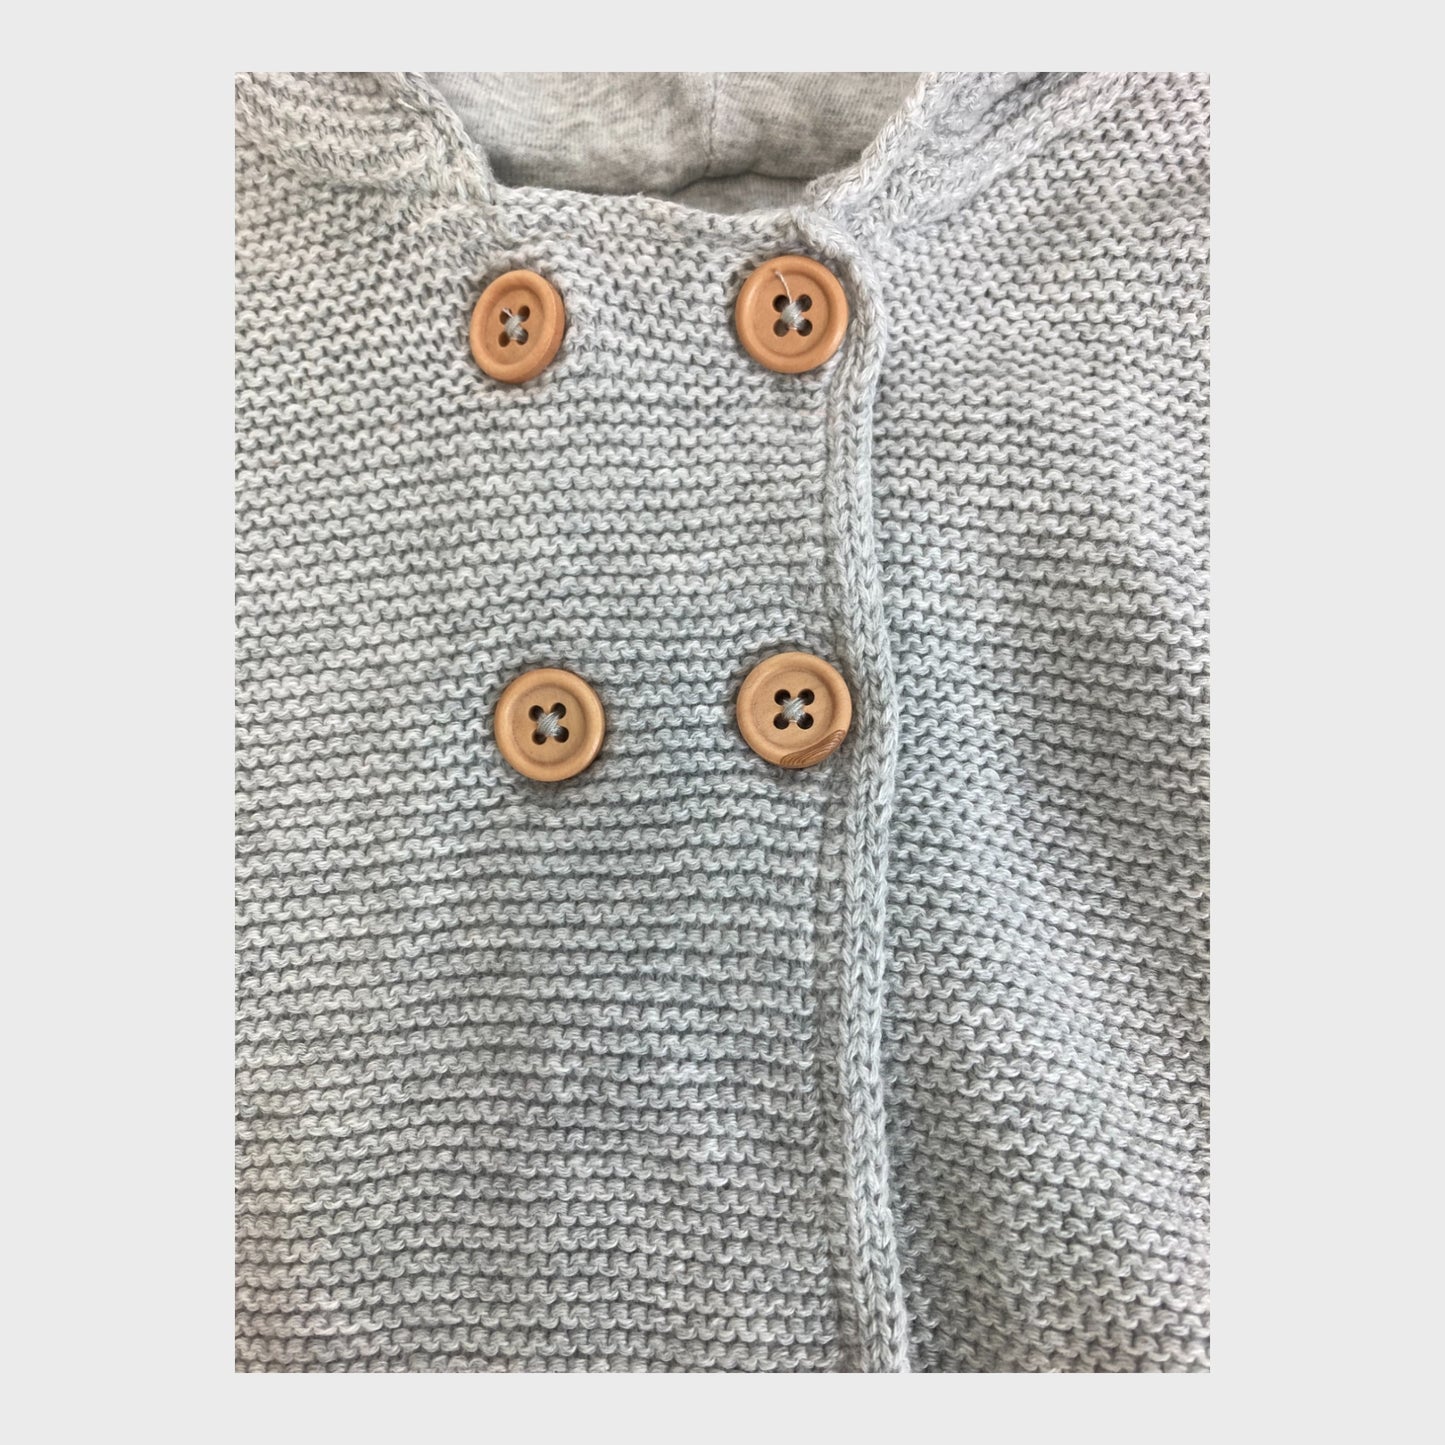 Baby Grey Knitted Hoodie With Ears